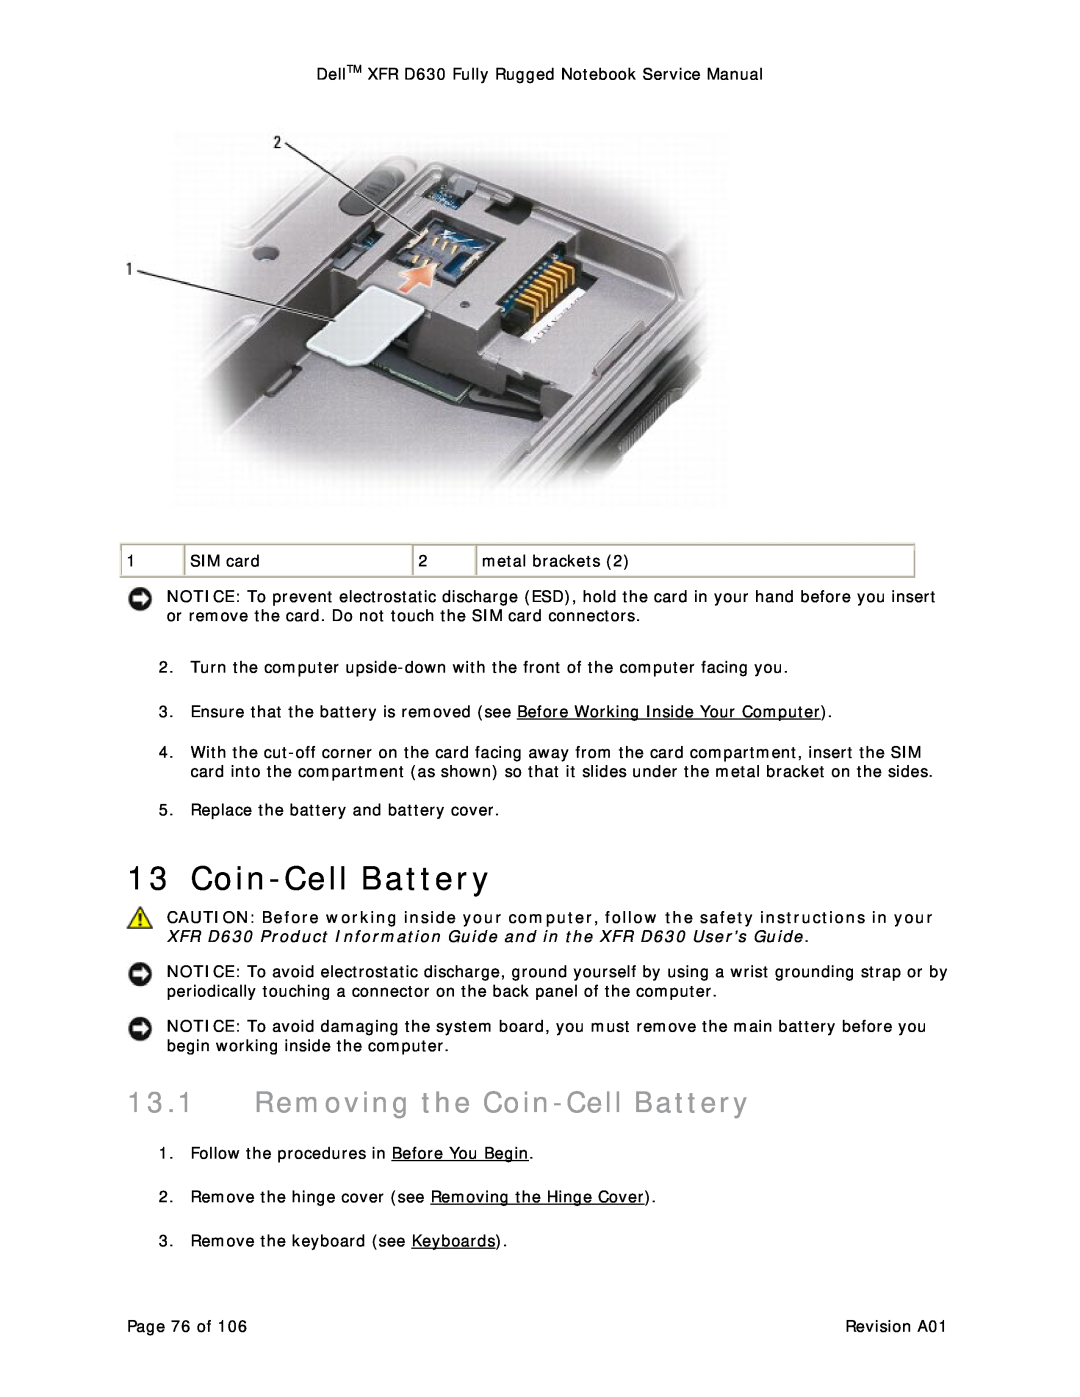 Dell D630 service manual Removing the Coin-Cell Battery 